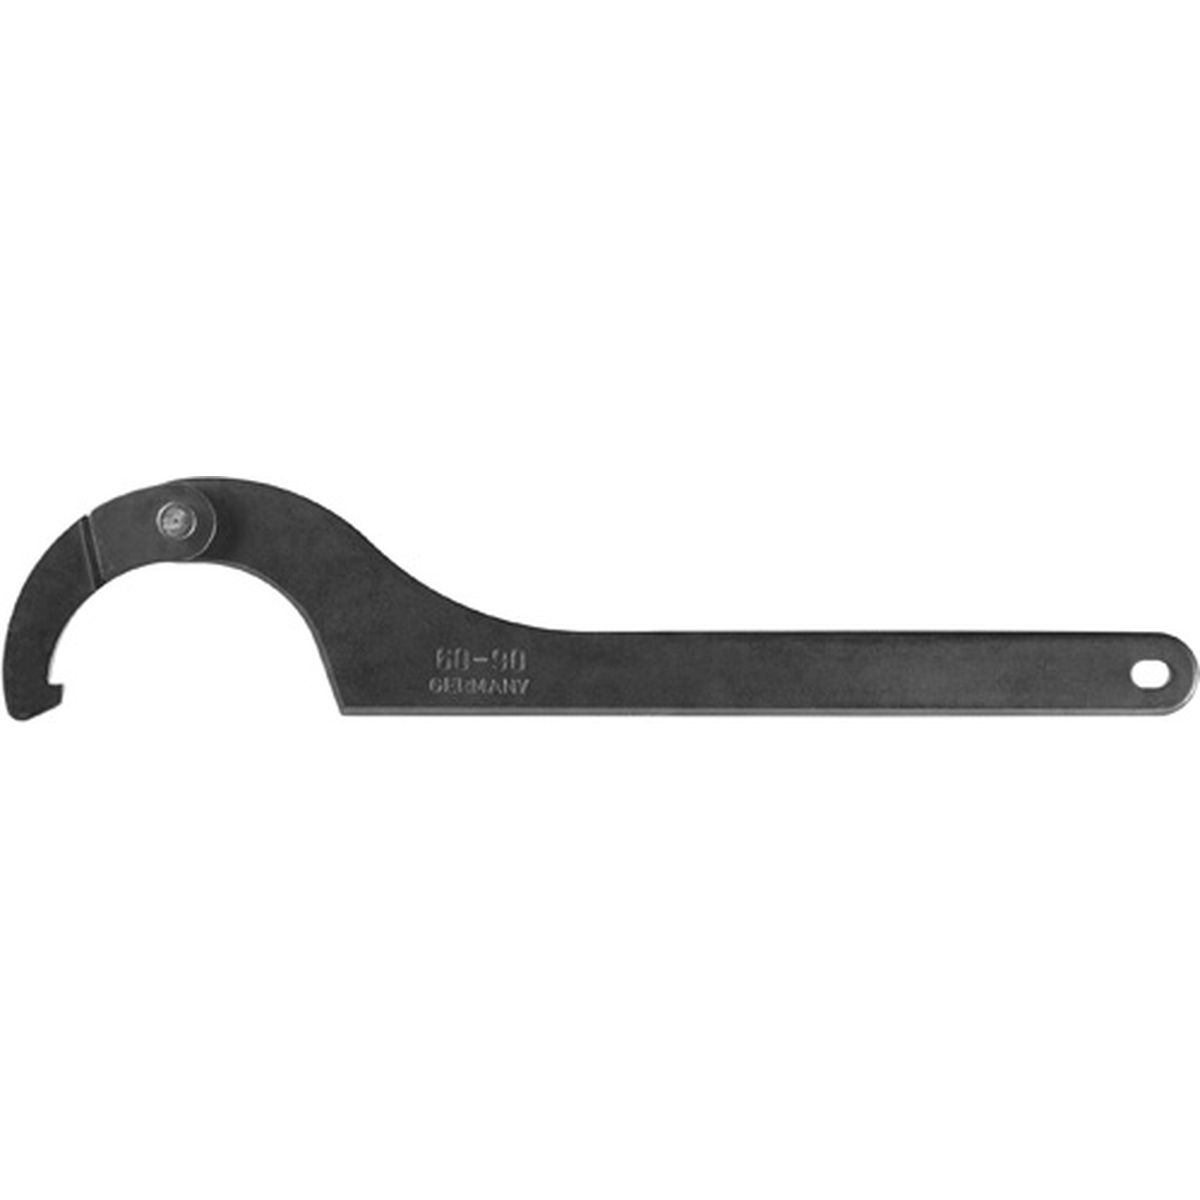 775C 20- 35 Hinged hook wrench with nose AMF